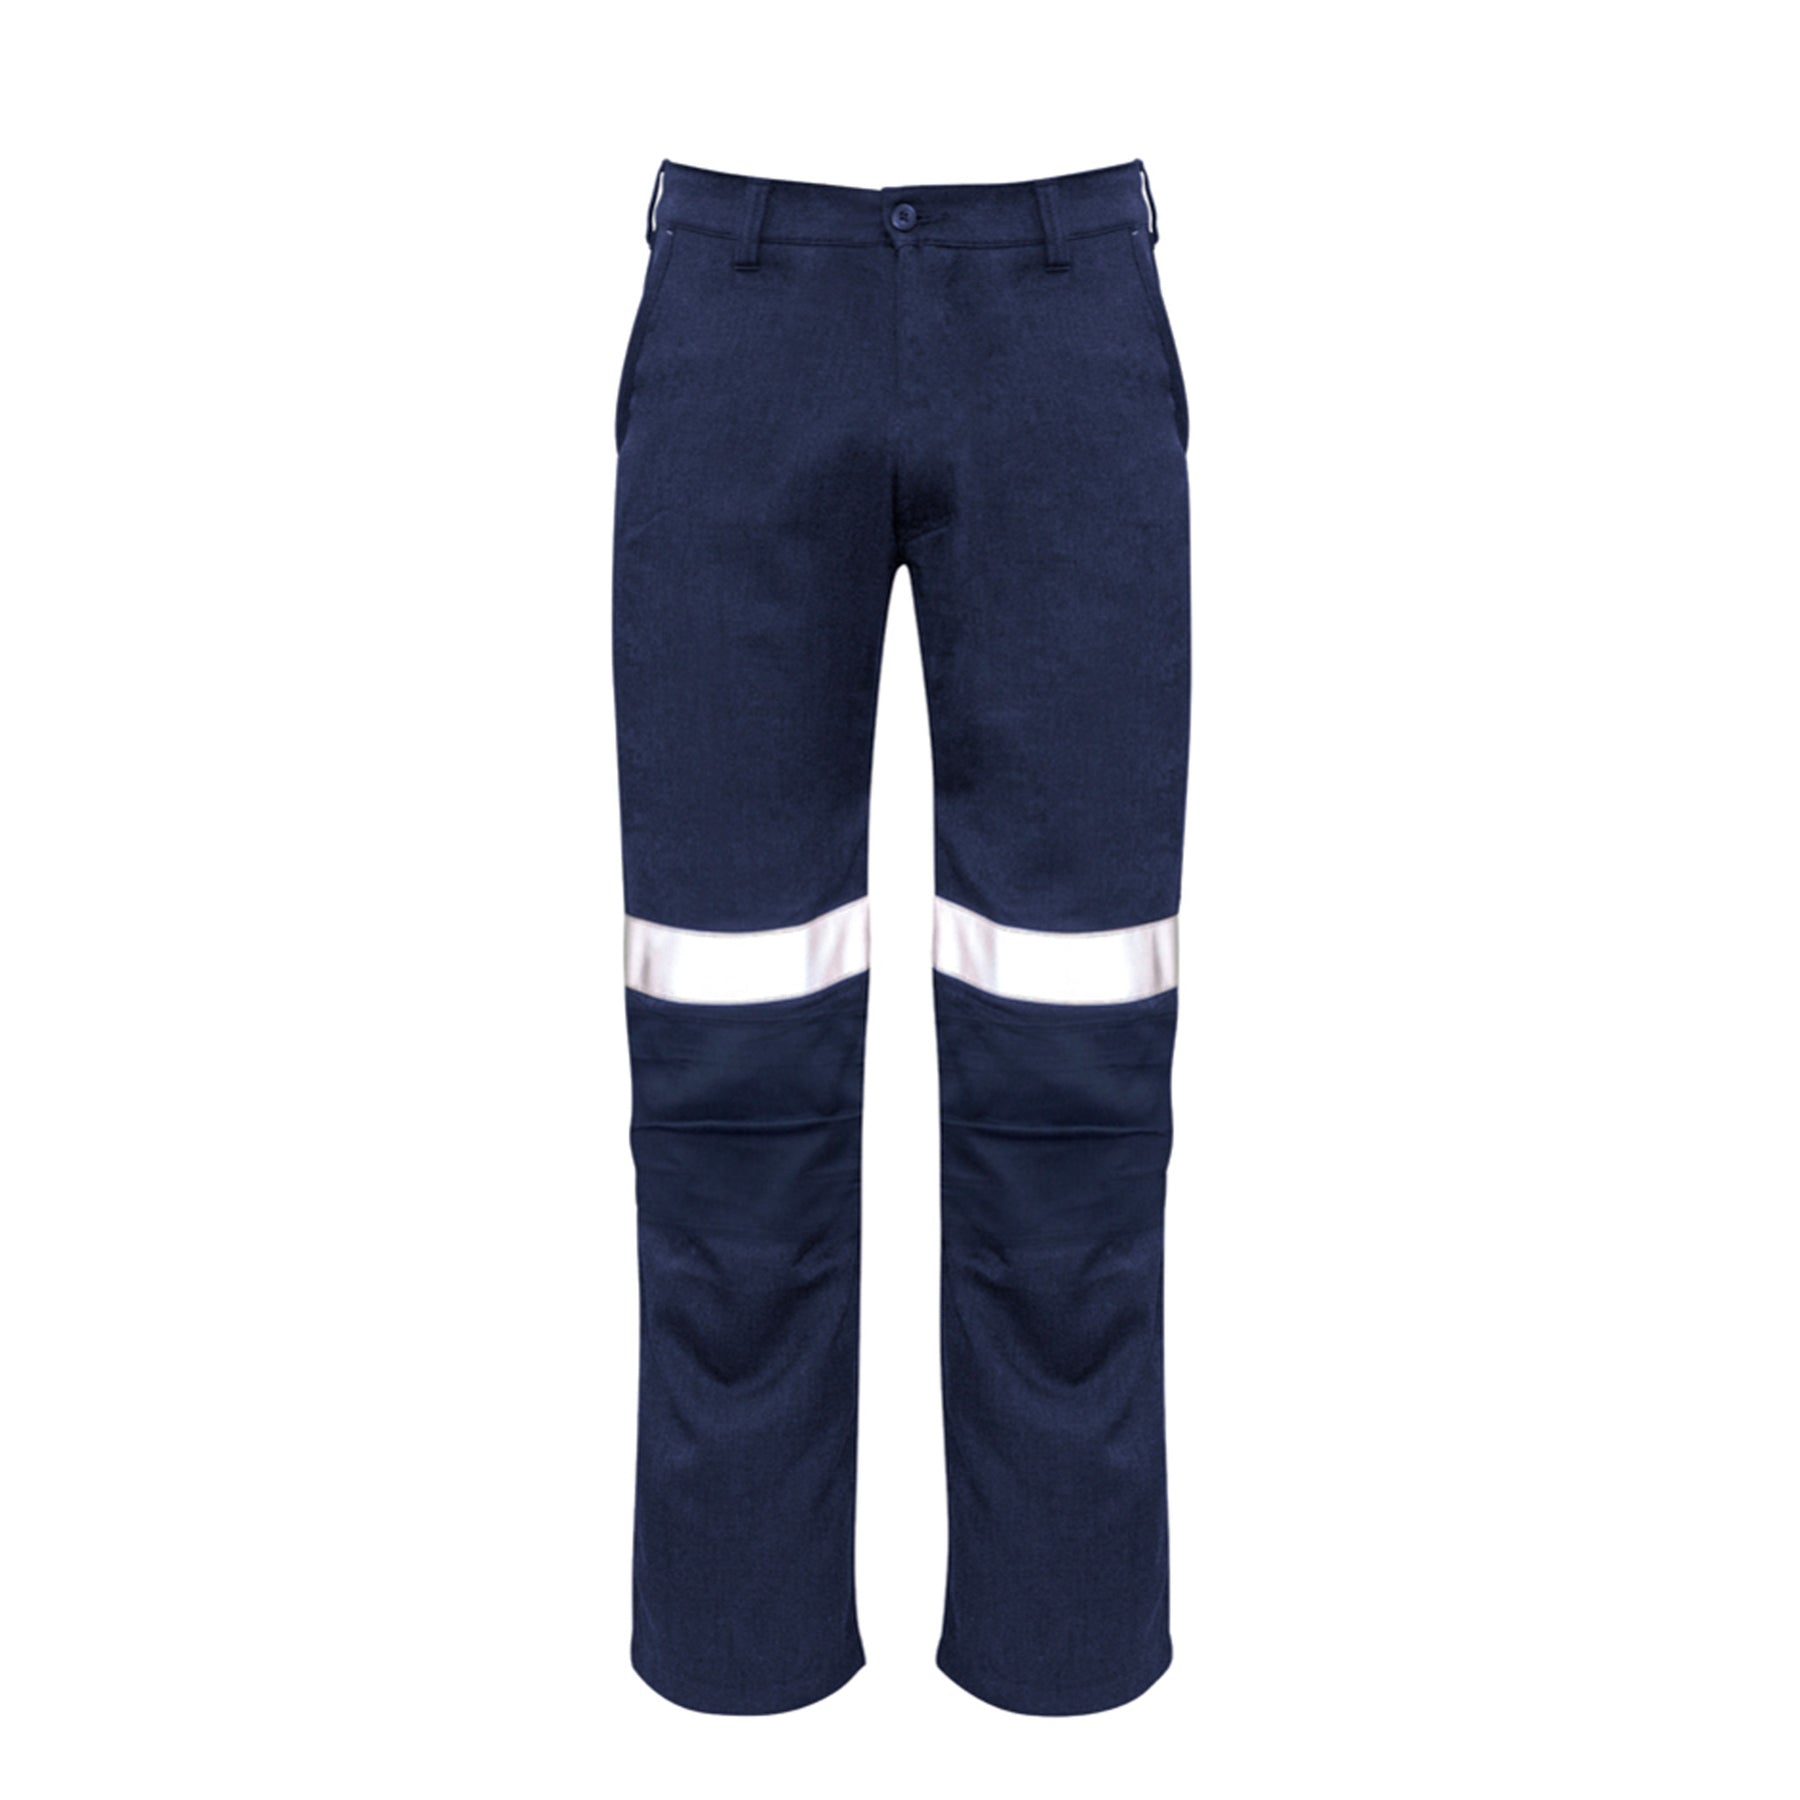 fr traditonal style taped work pant with reflective tape